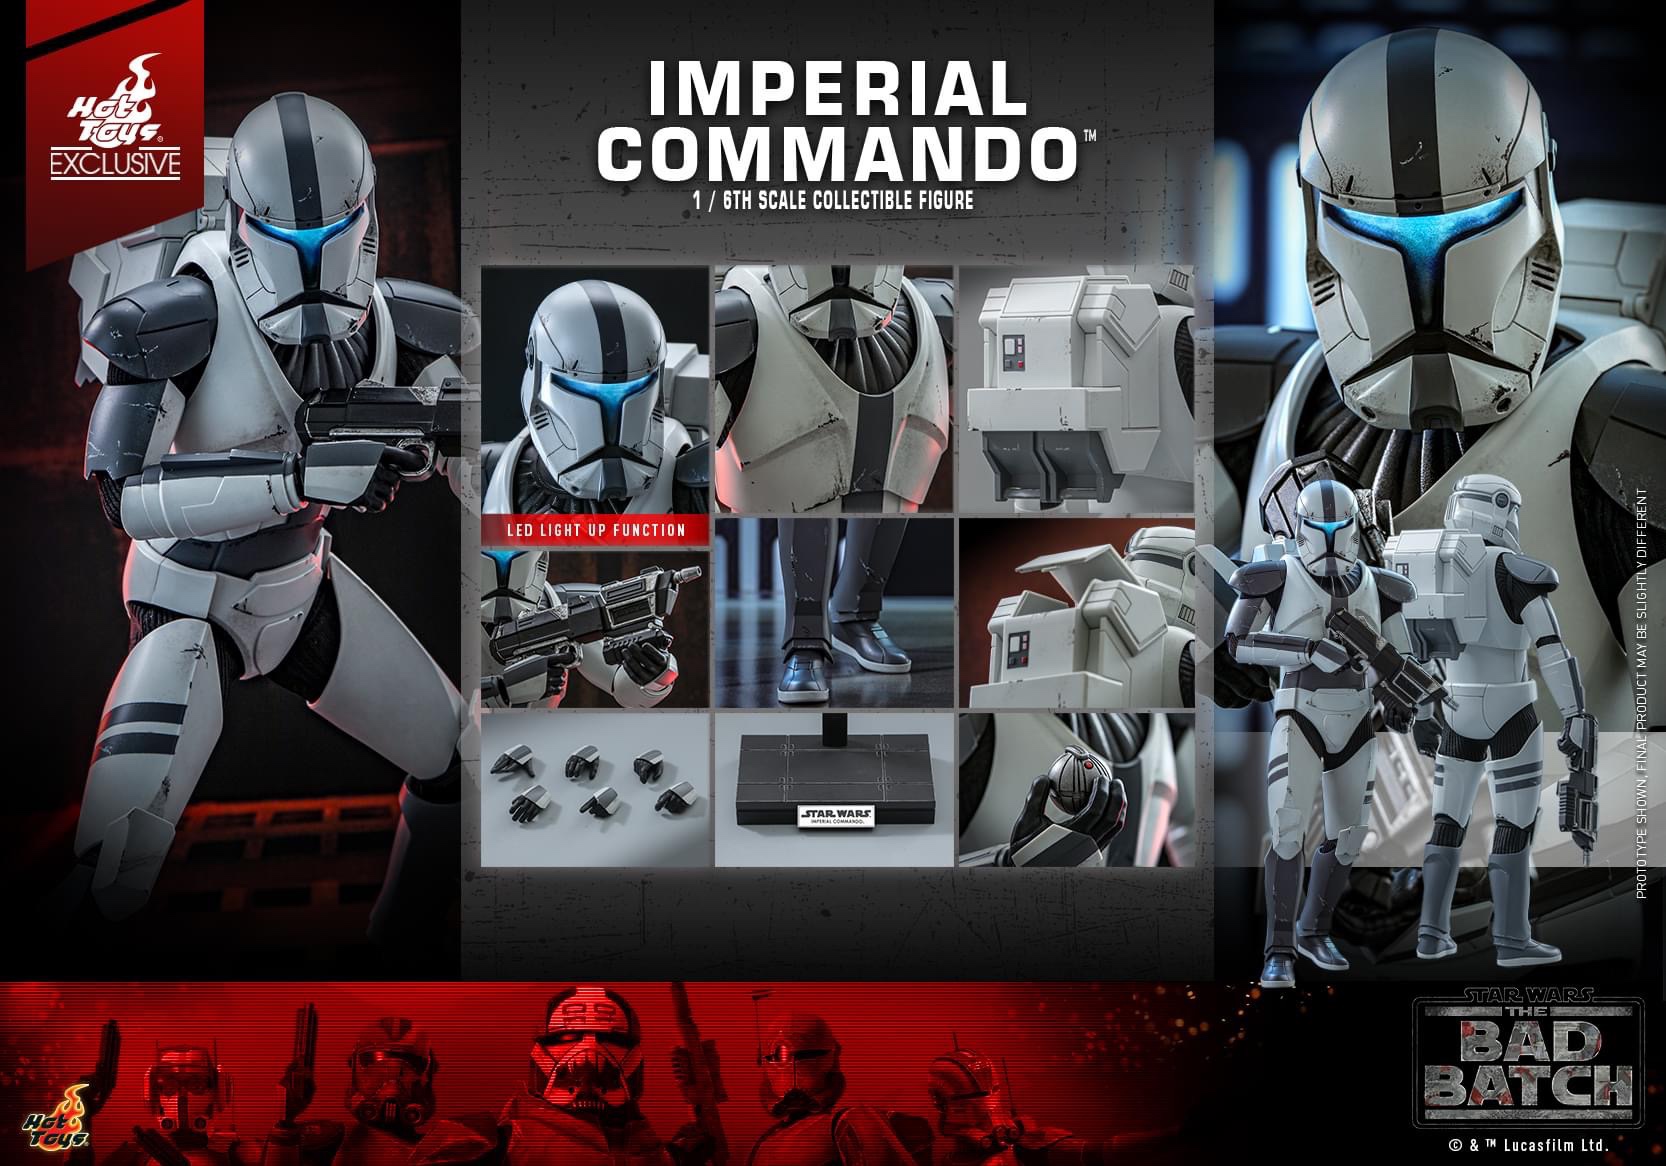 Star Wars: The Bad Batch - 1/6th scale Imperial Commando Collectible Figure